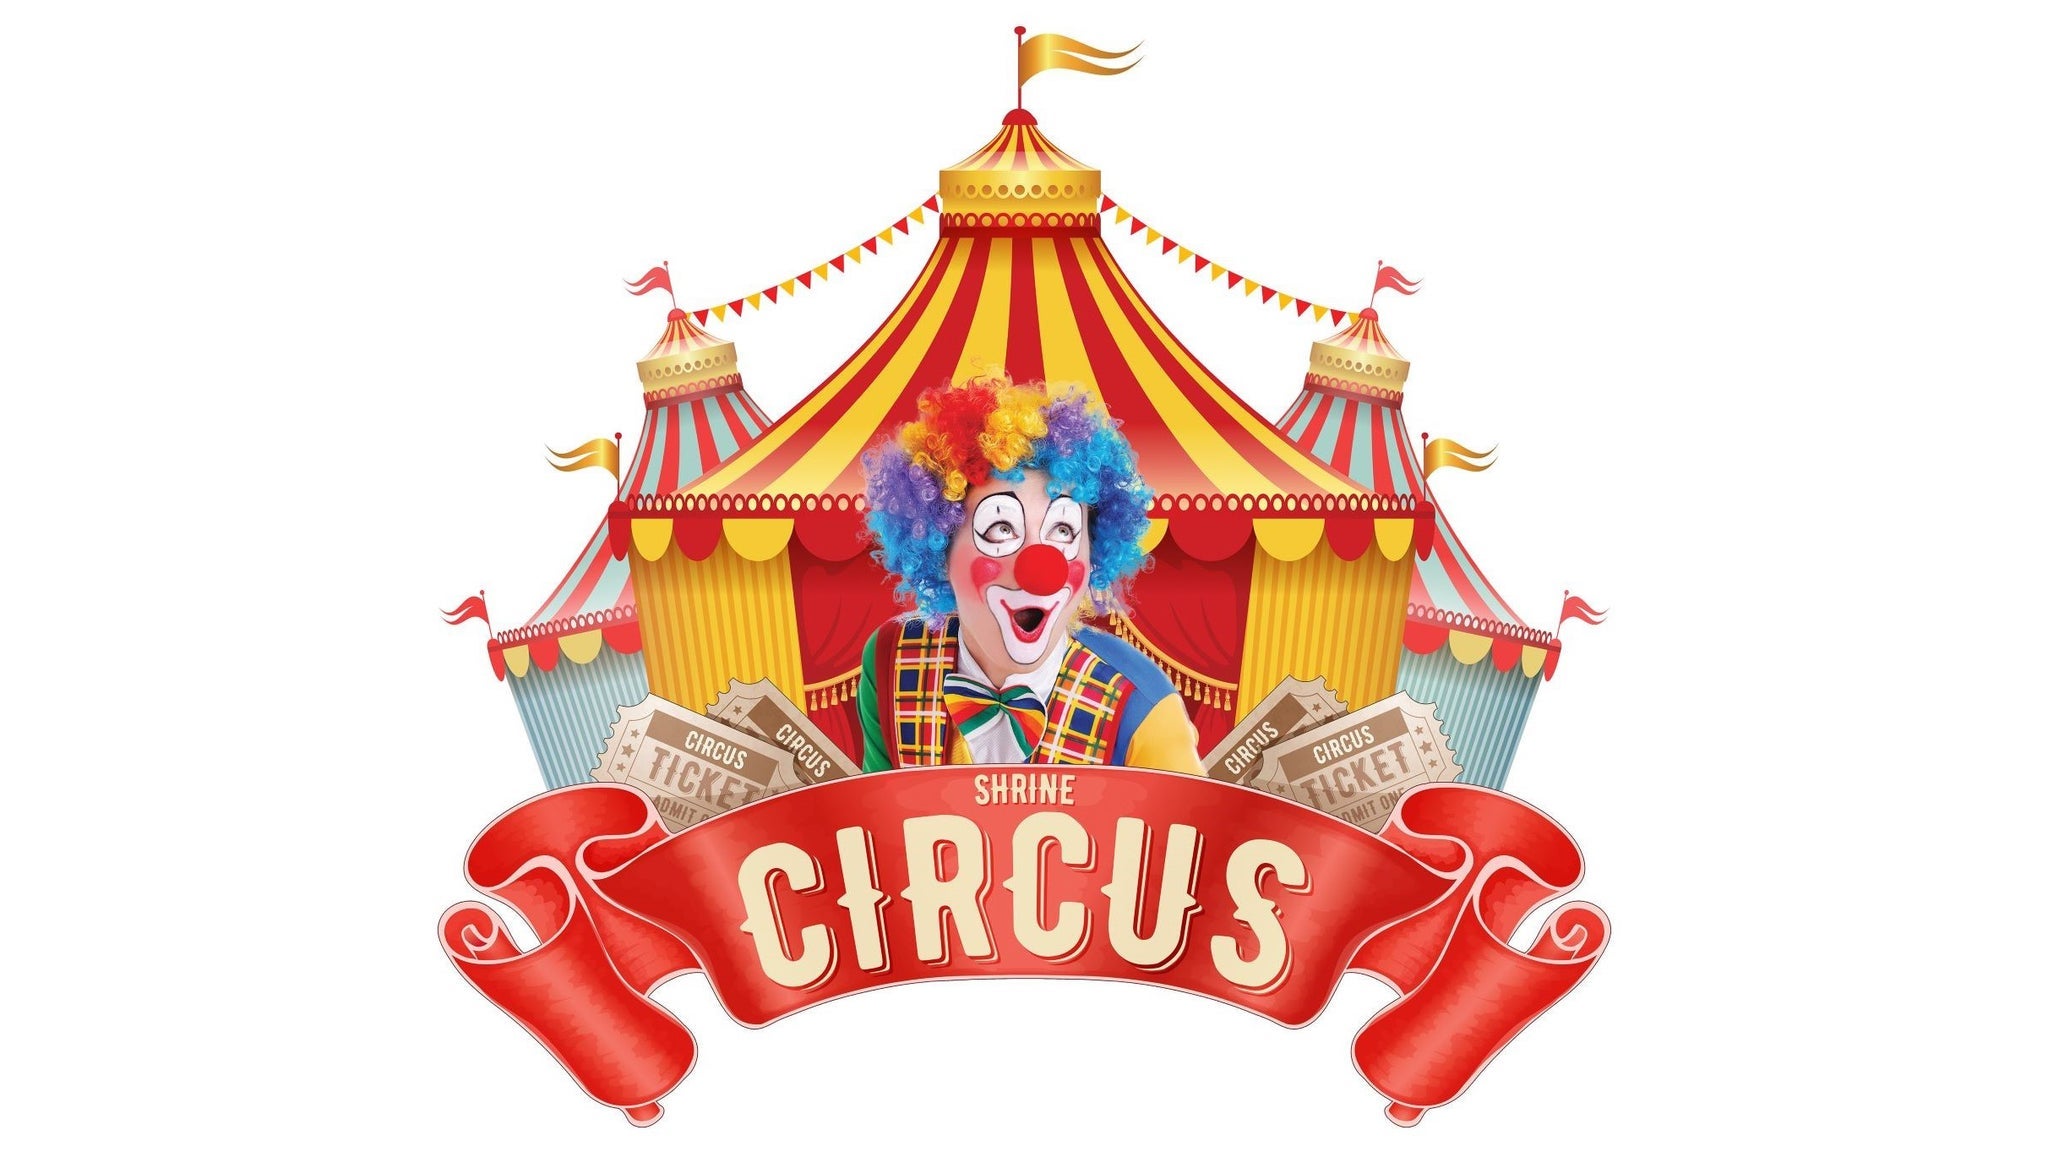 Shrine Circus 2022 at Cable Dahmer Arena - Independence, MO 64055